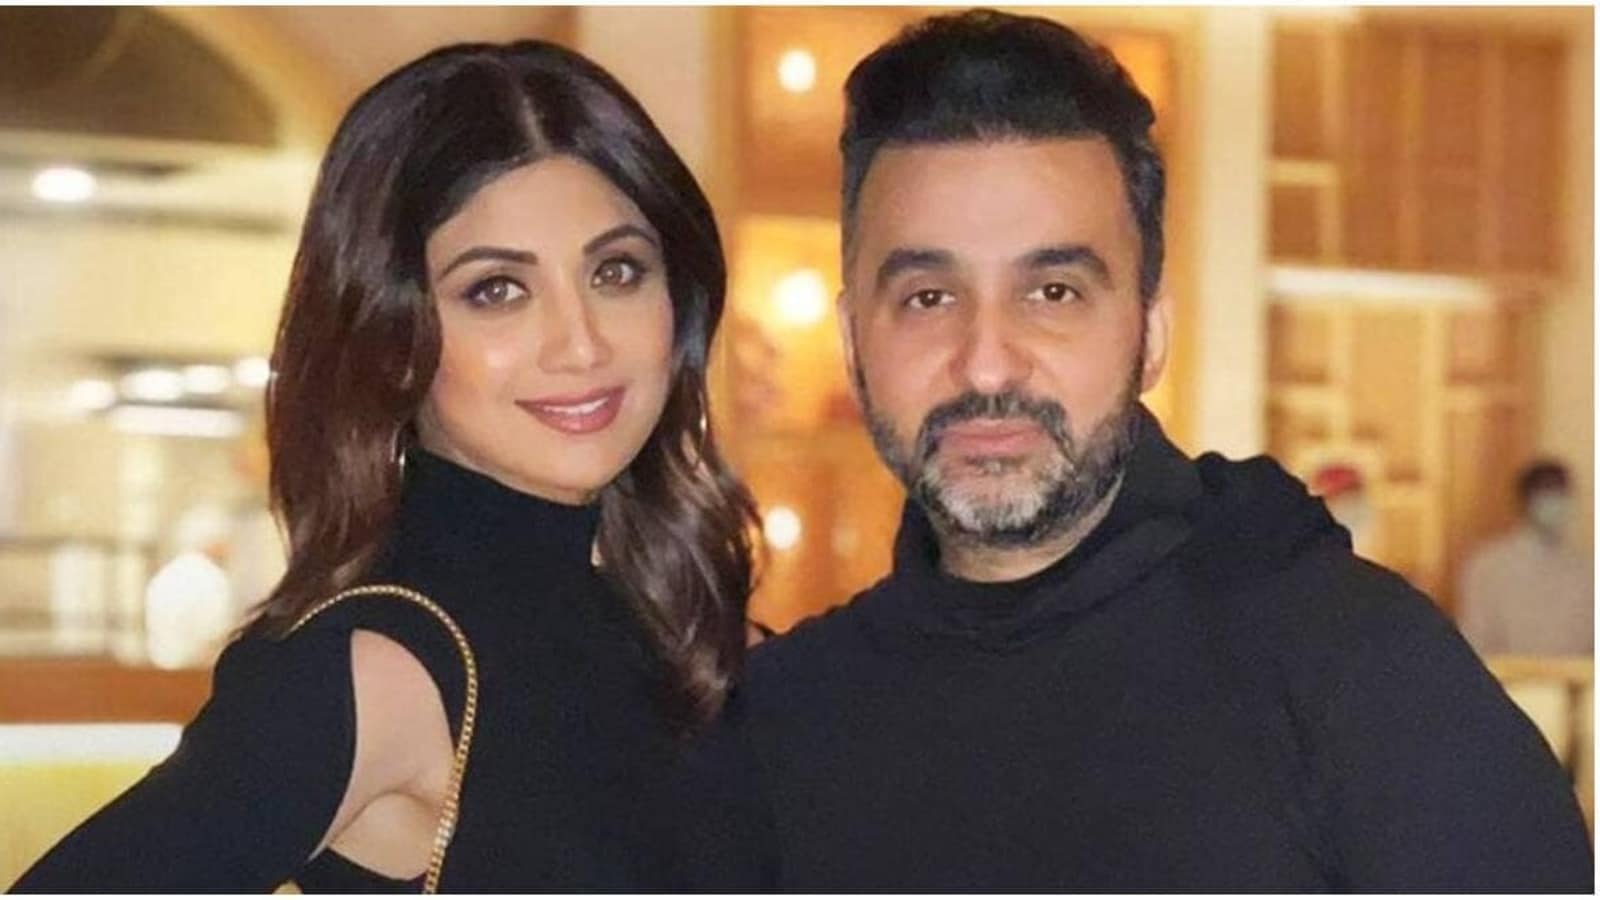 Shilpa Shetty reacts as Badshah mentions what she’s been through, wonders if the segment will make it on air